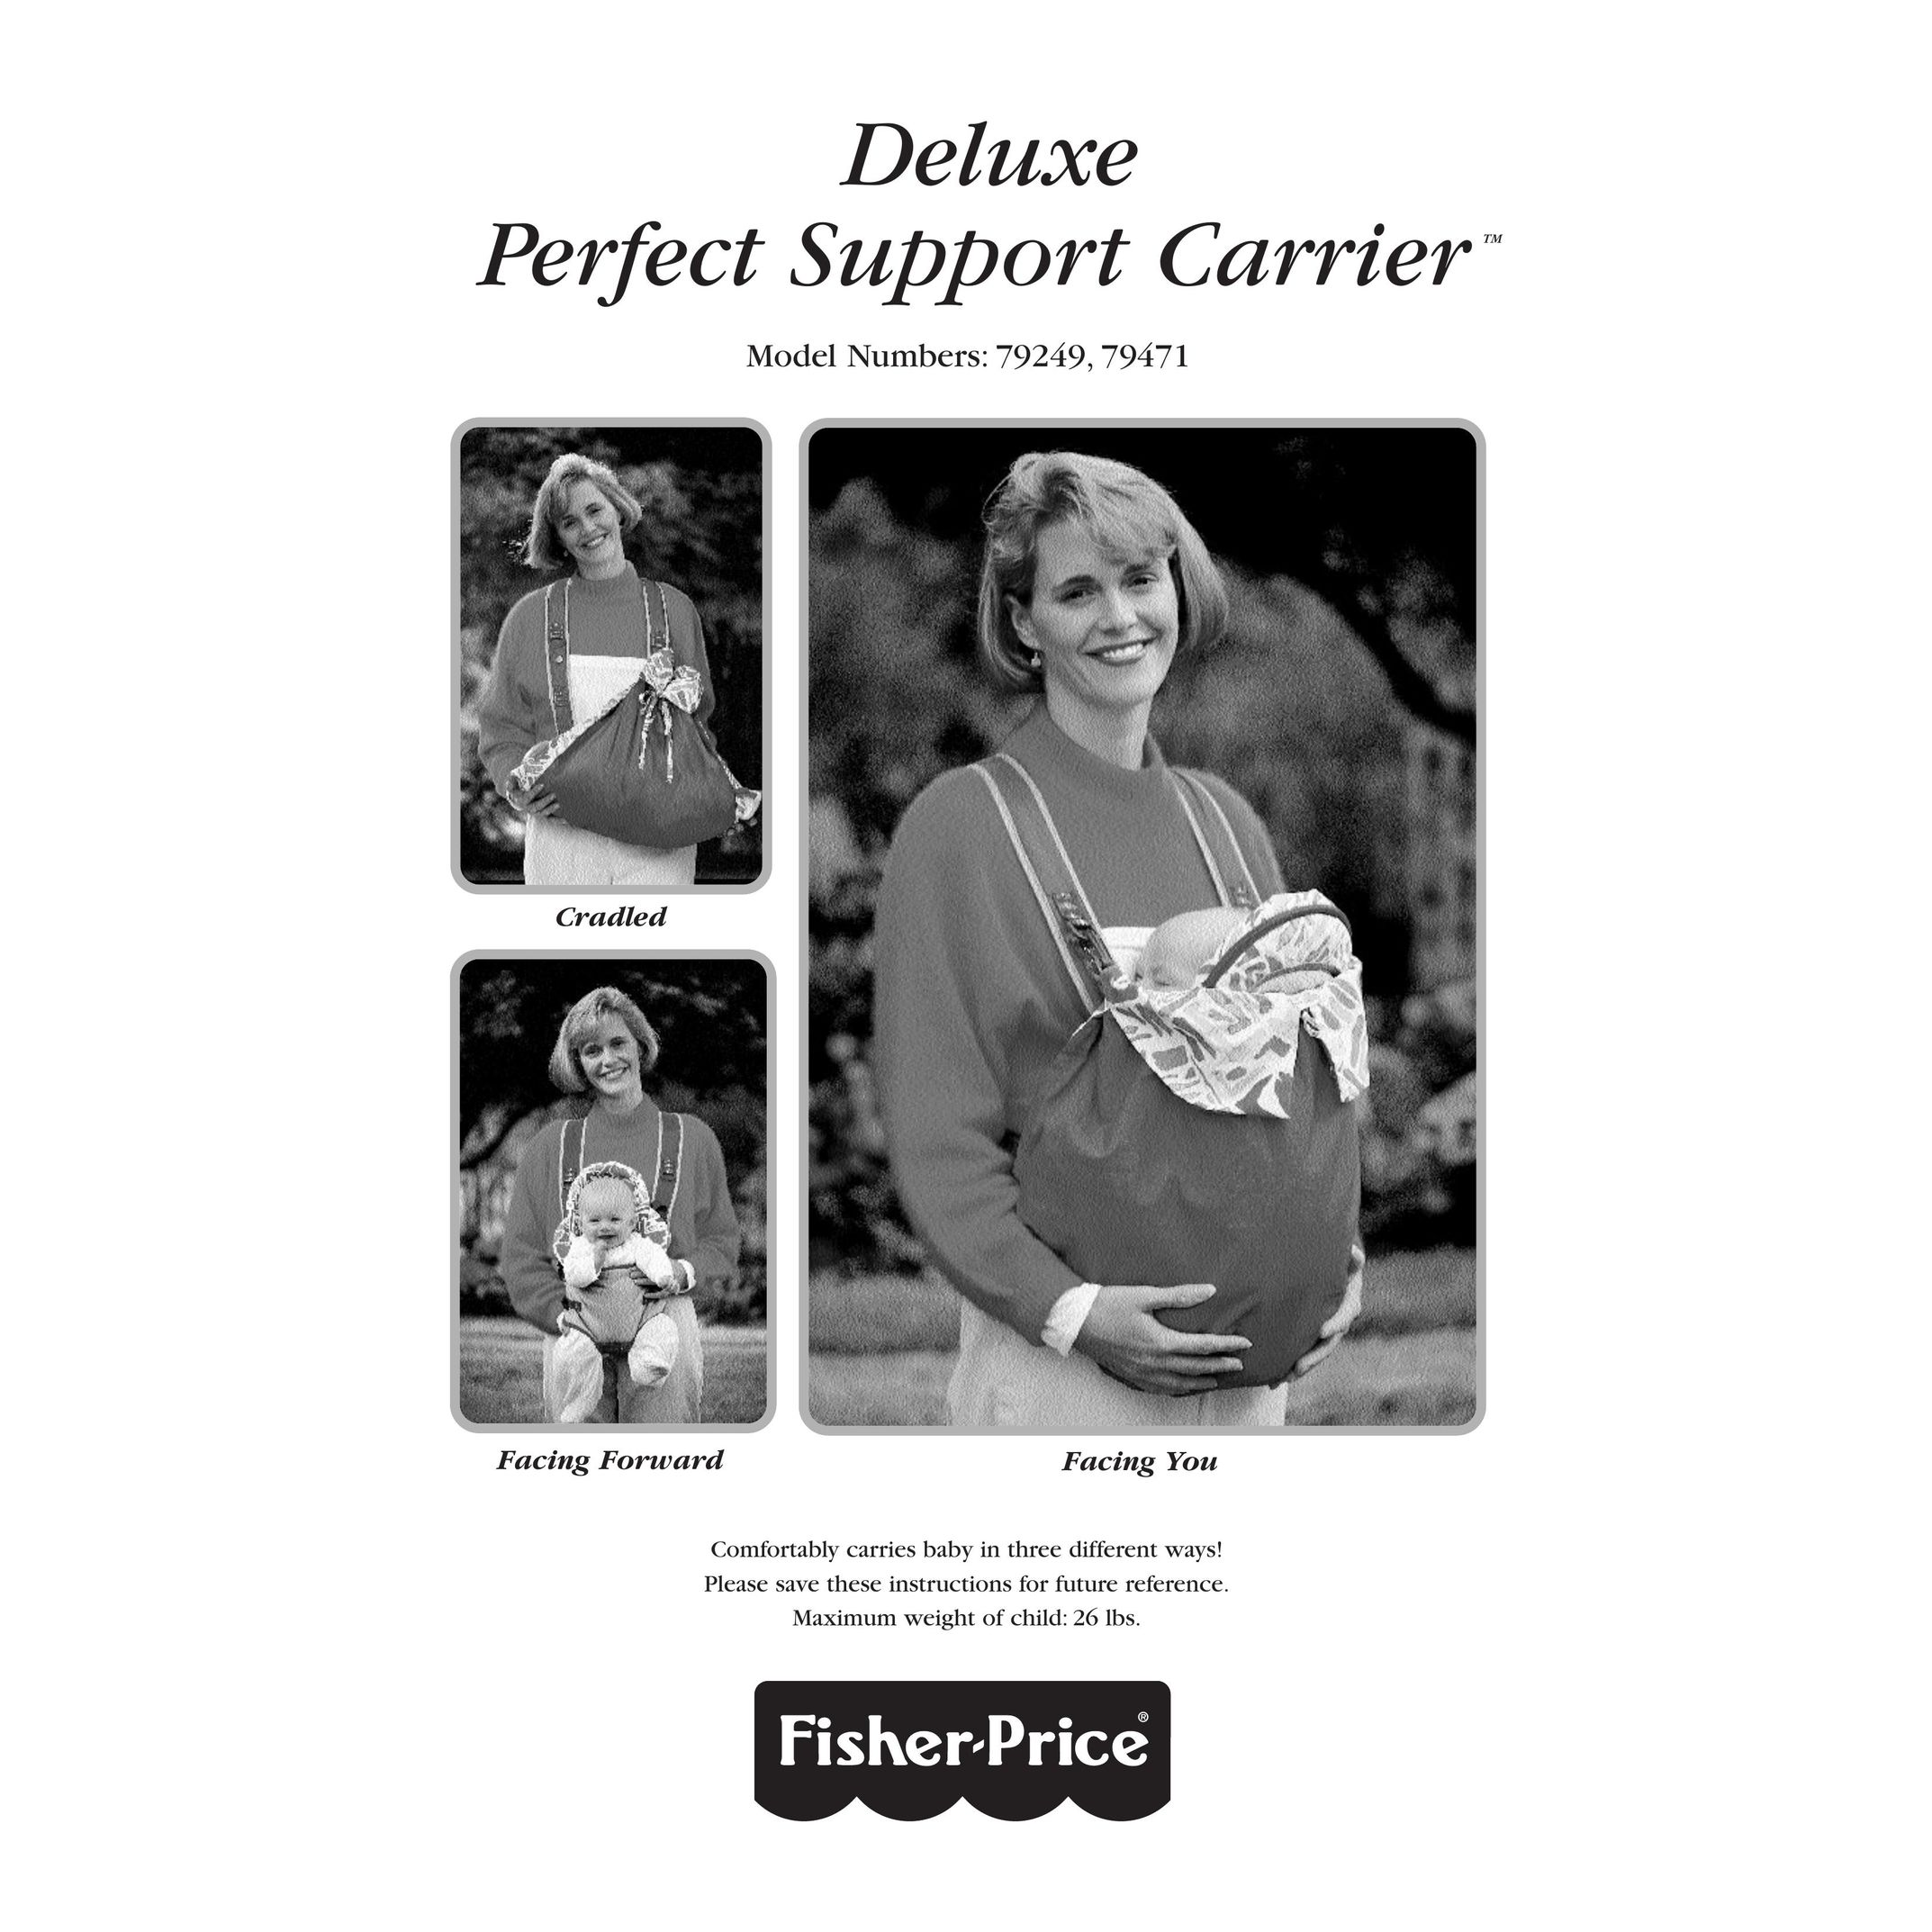 Fisher-Price 79471 Baby Carrier User Manual (Page 1)